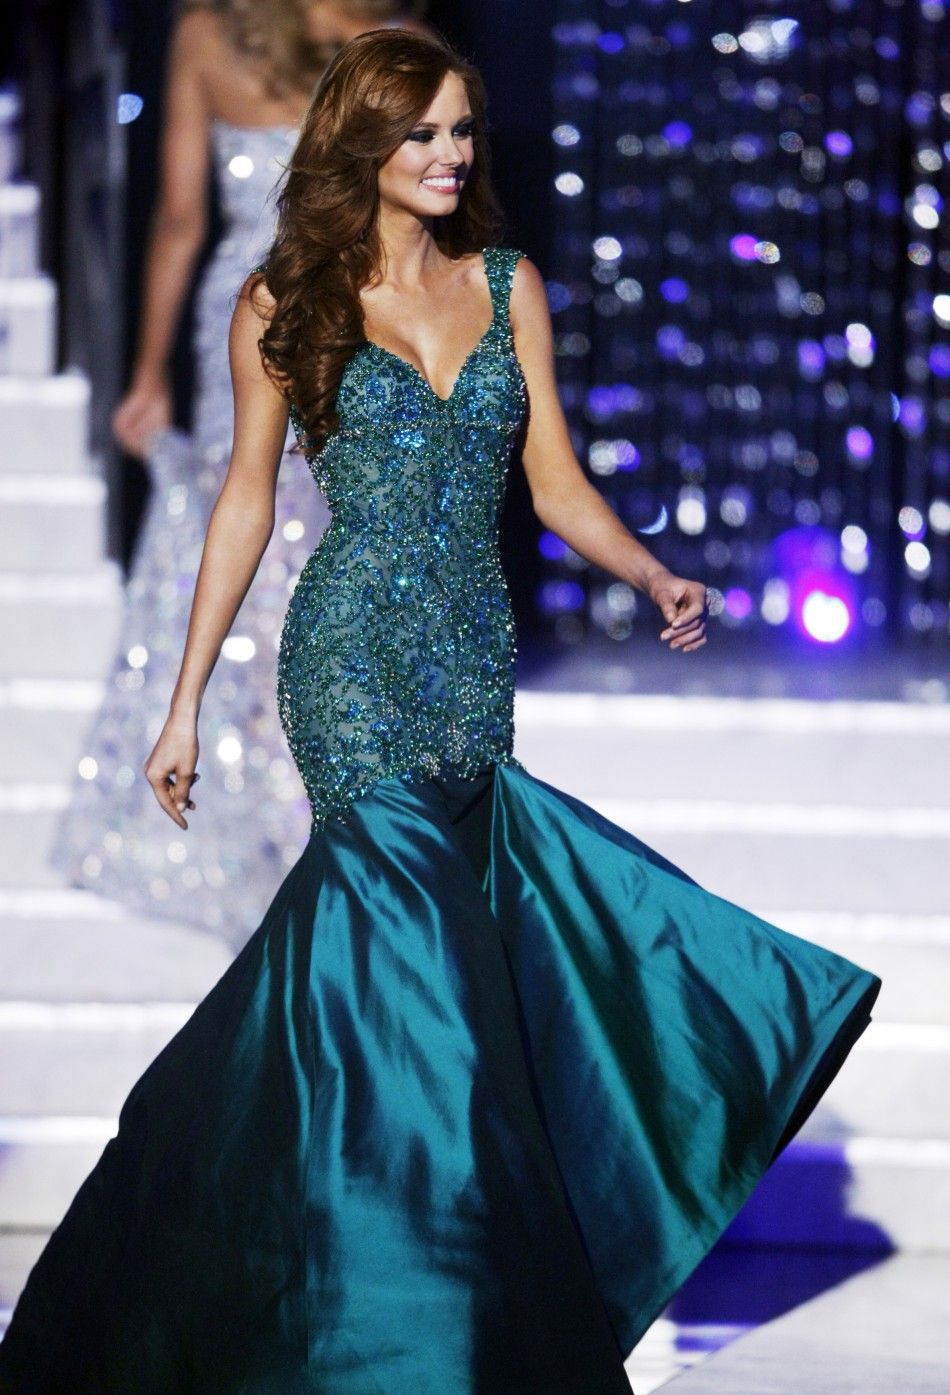 Miss California Alyssa Campanella competes in her evening gown during the 2011 Miss USA pageant in Las Vegas 20062011 System ID  RTR2NV80 Image ID  GM1E76K178201 Photographer  REUTERSSteve Marcus Miss California Alyssa Campanella competes in her 